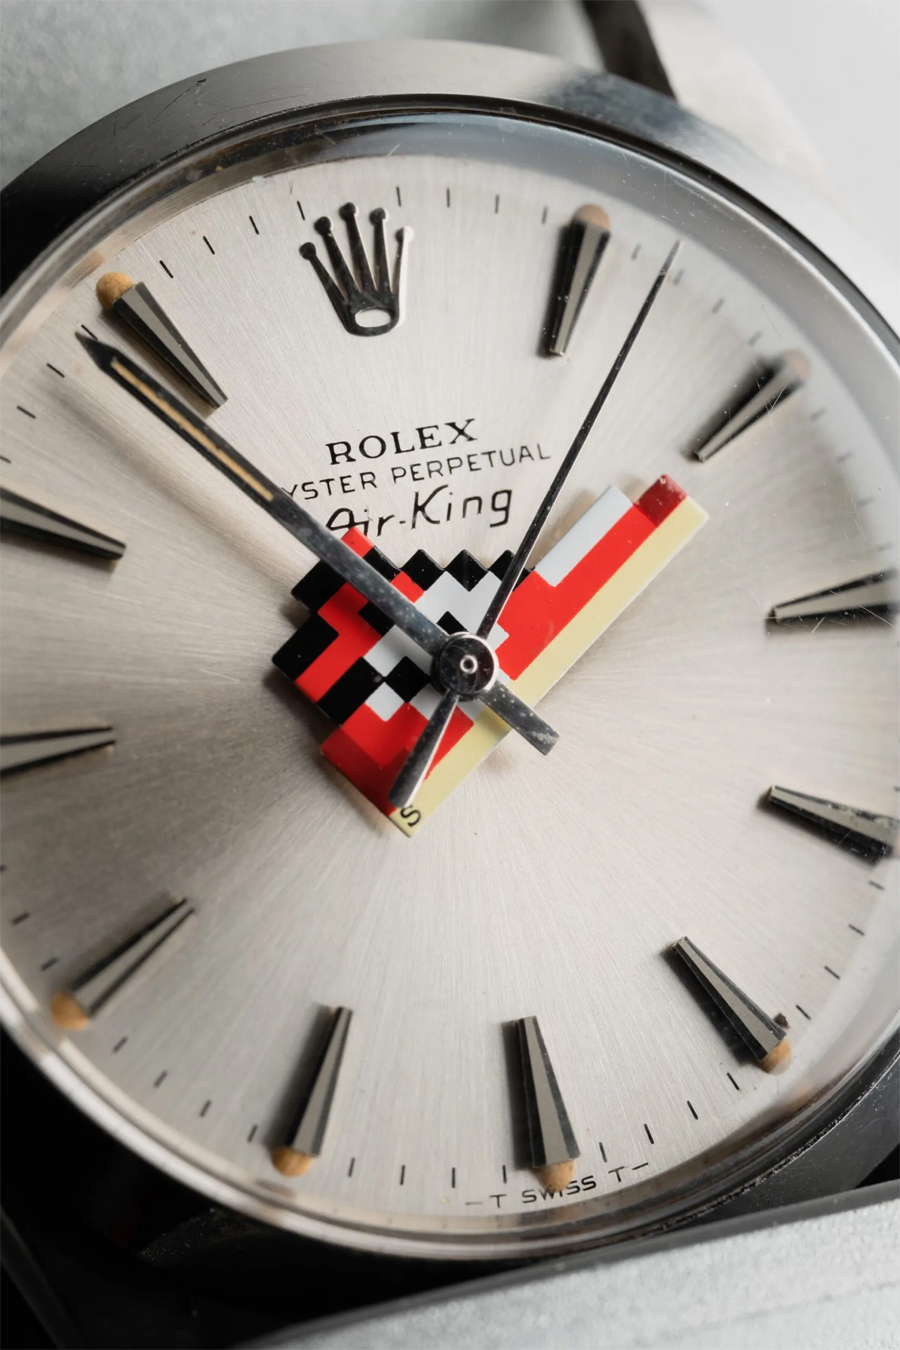 Limited Edition of 23 Air Watch Hands for Rolex Air King